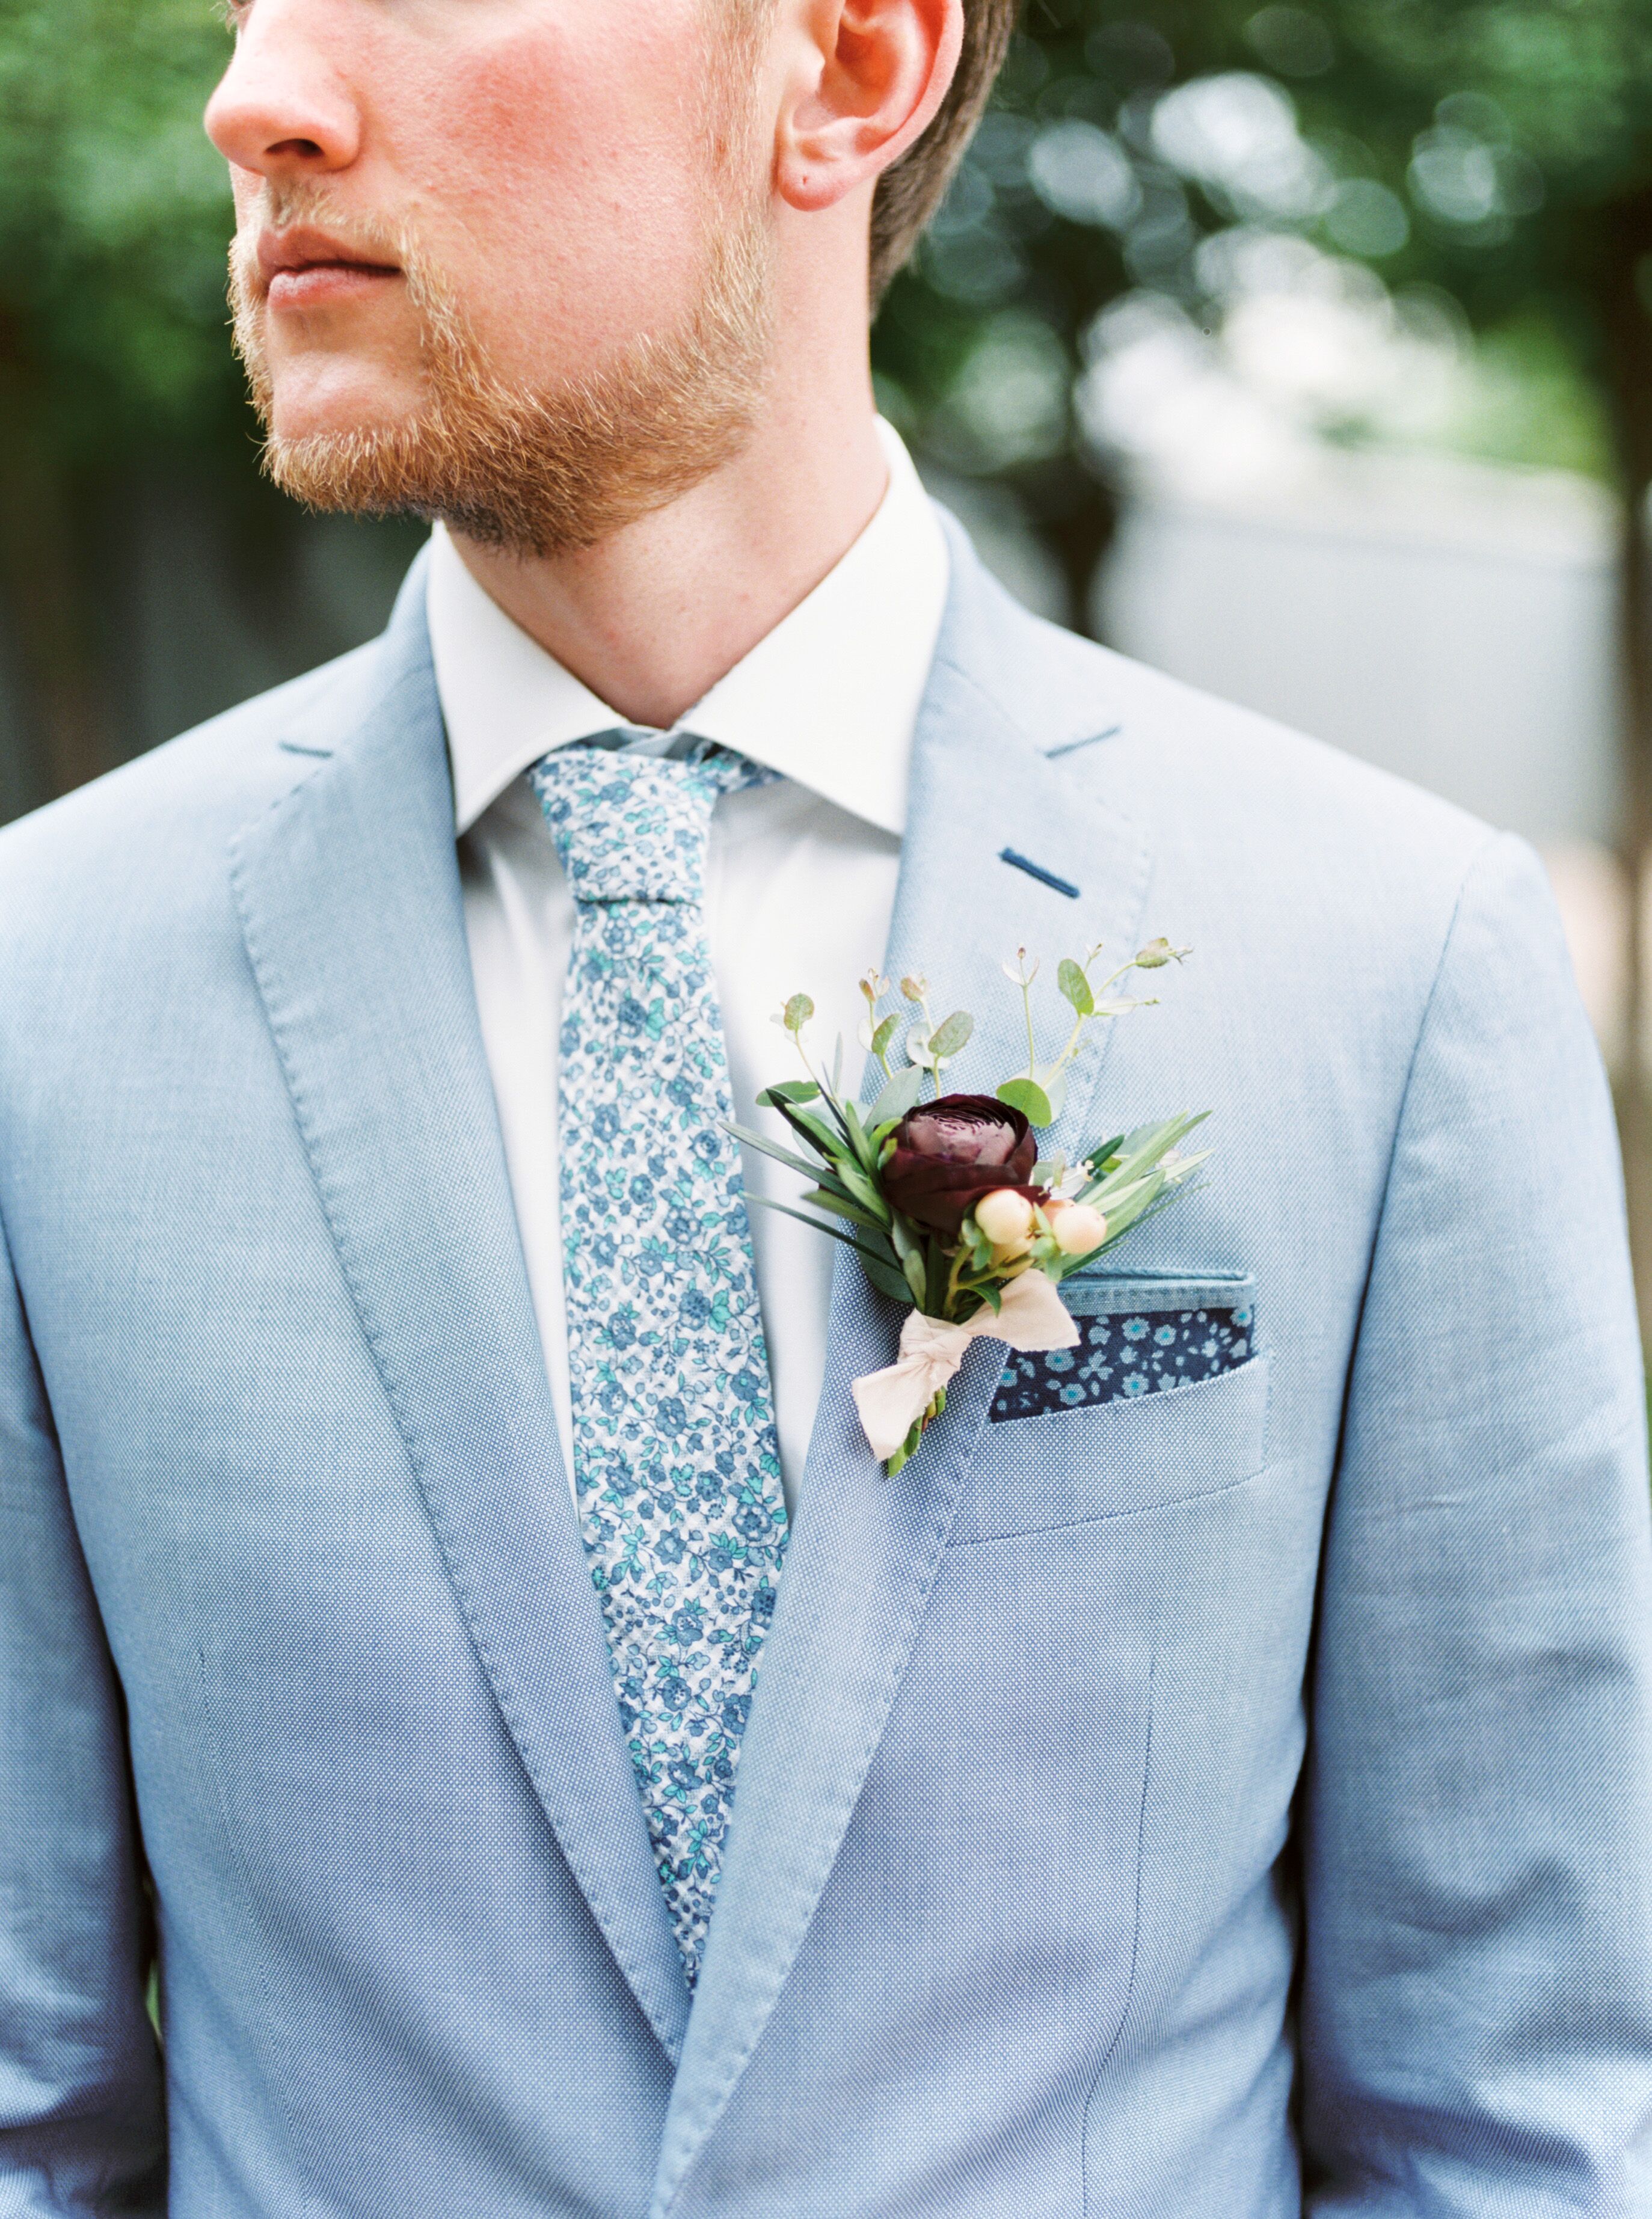 Groom in Pale Blue Suit with Floral Tie